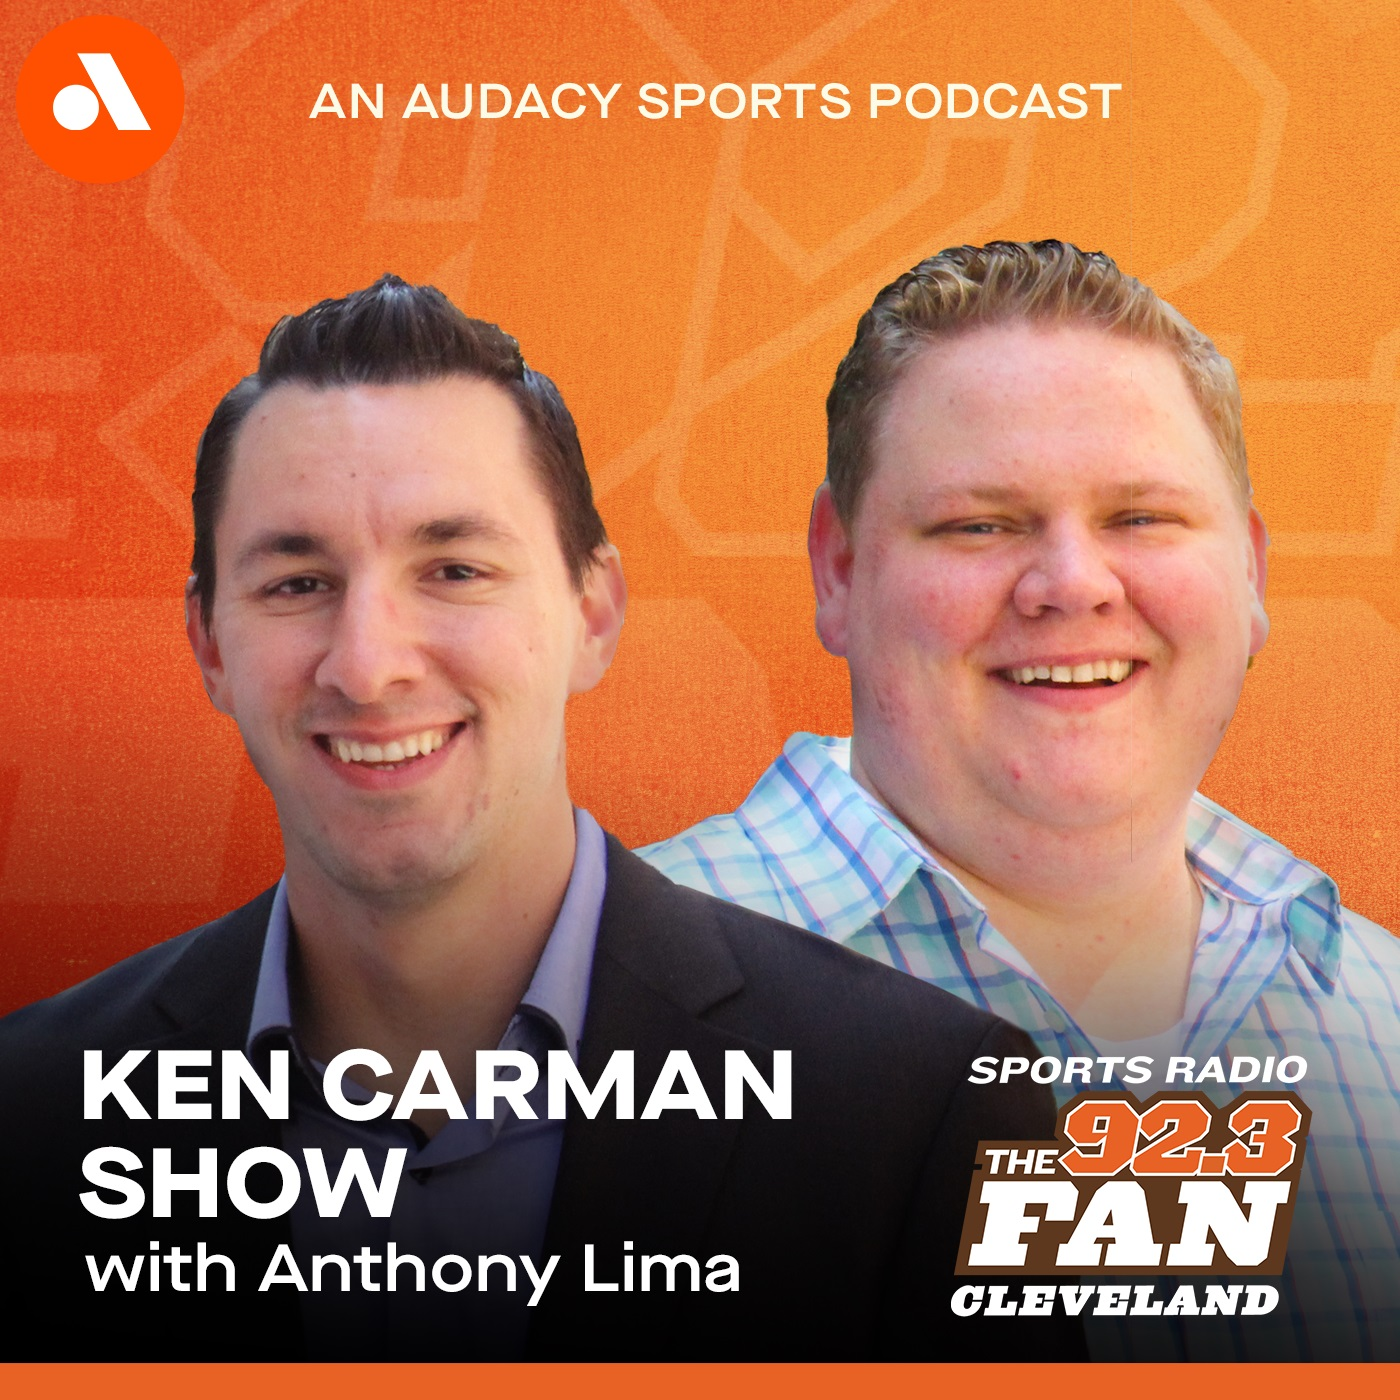 The Ken Carman Show with Anthony Lima reacts to the Browns 33-31 win over the Ravens